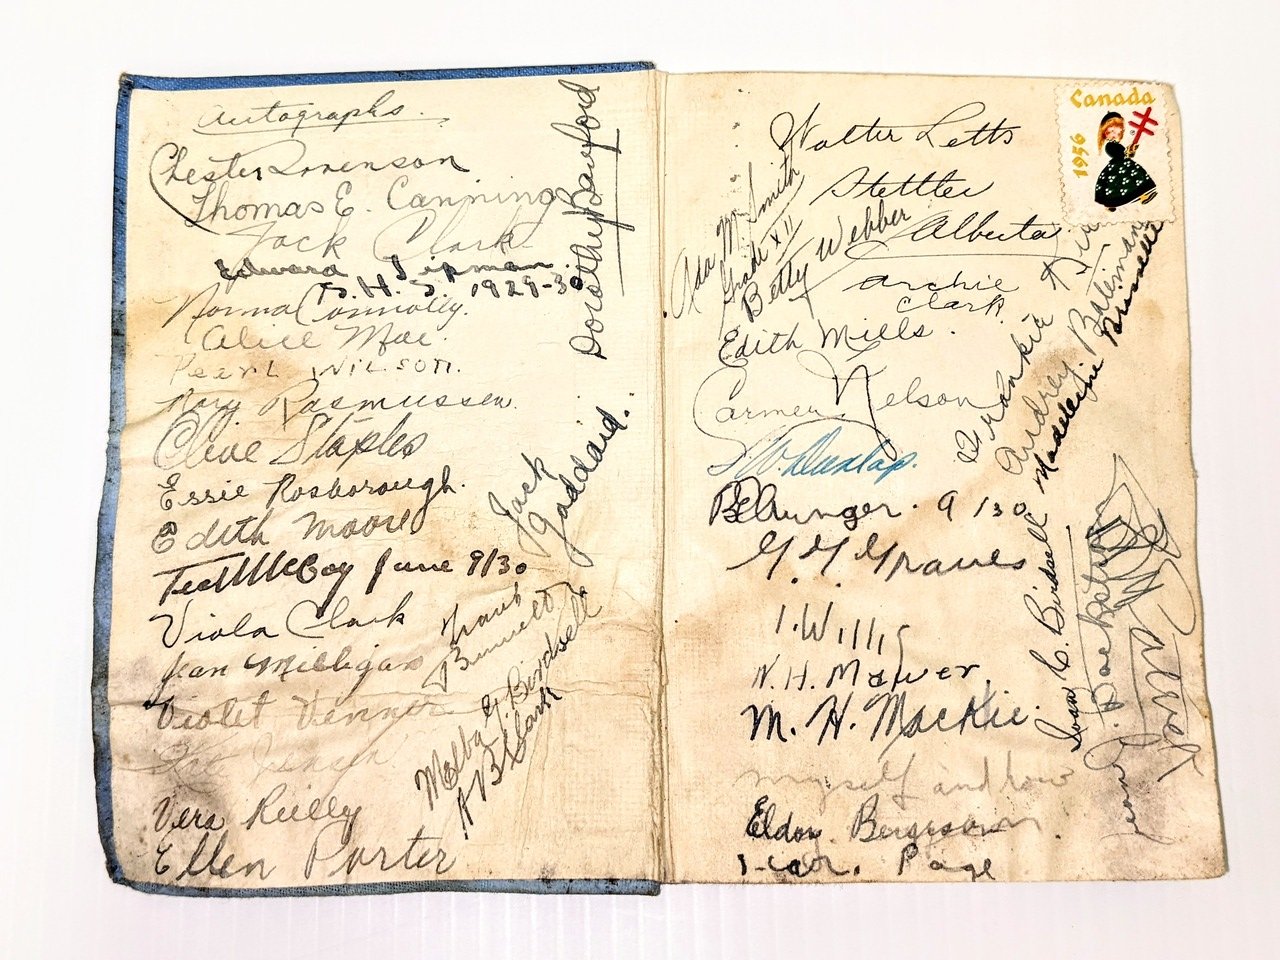 The artifact is a book titled "Cornelius Nepos lives of Miltiades and Epaminondas" which is a mouthful! More interesting however, is the first page which is full of handwritten signatures as shown by the picture. The most prominent seems to be "Walter Letts, Stettler Alberta" on the top of the right page. This - and the fact that it is a part of the Eek, Marilyn collection- tell us that this classic belonged to Walter Letts. We don't recognize many of the other signatures - though there are familiar surnames such as "Clark" and "Wilson". The book is well used with notes throughout its pages, and even more signatures - some of which are dated 1930.
22/02/2022
996.40.108 / Eek, Marilyn